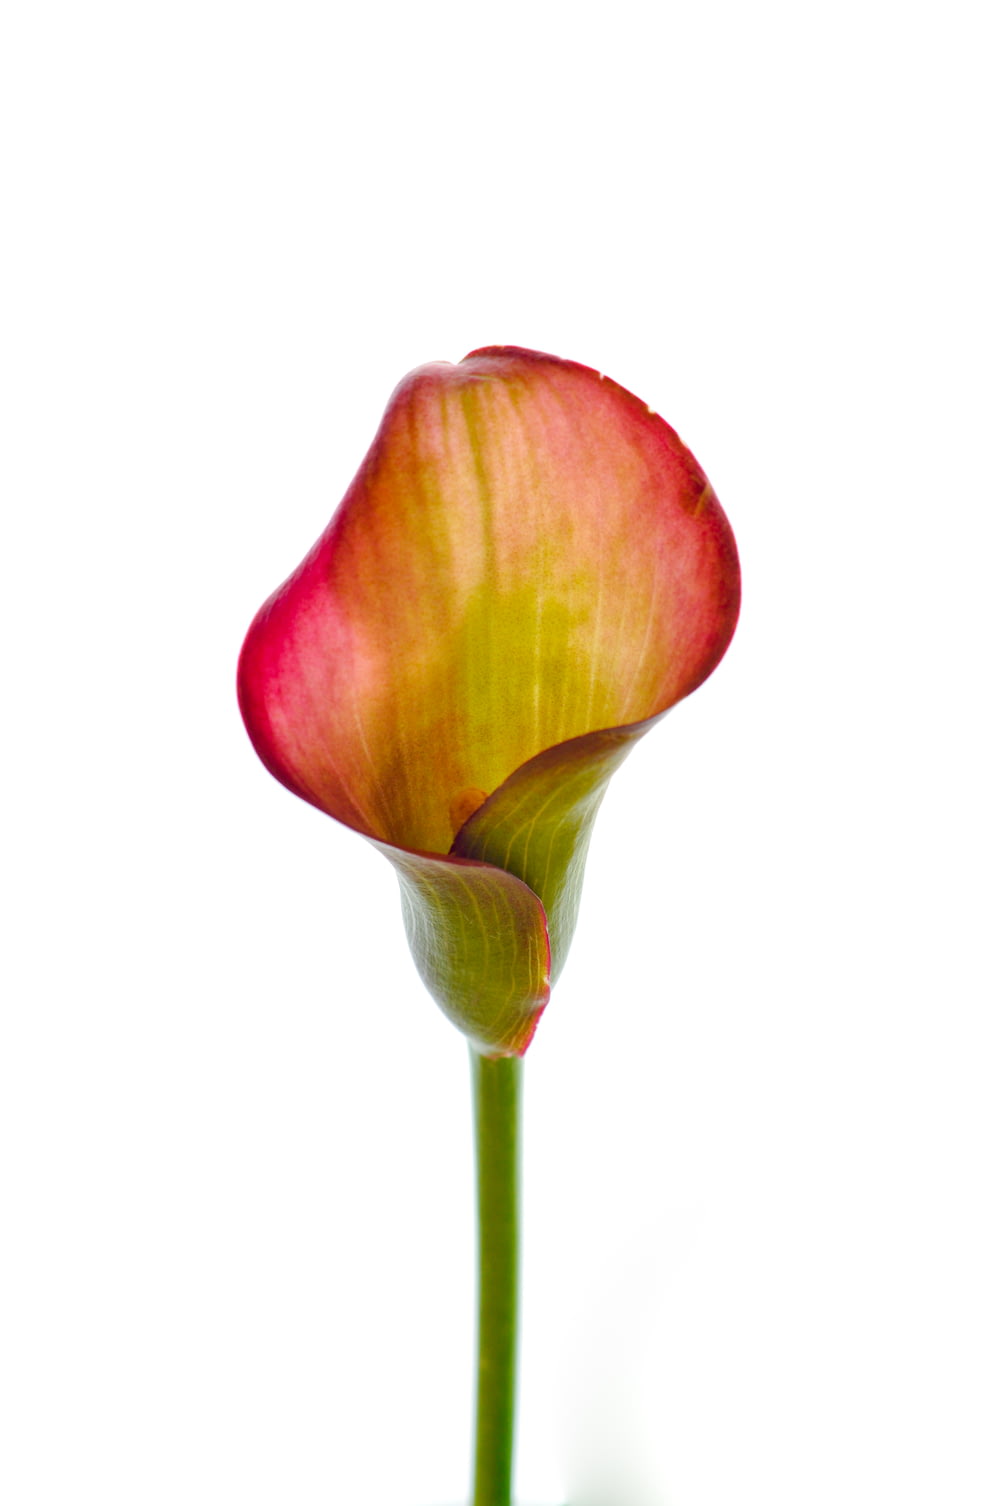 red tulip in close up photography